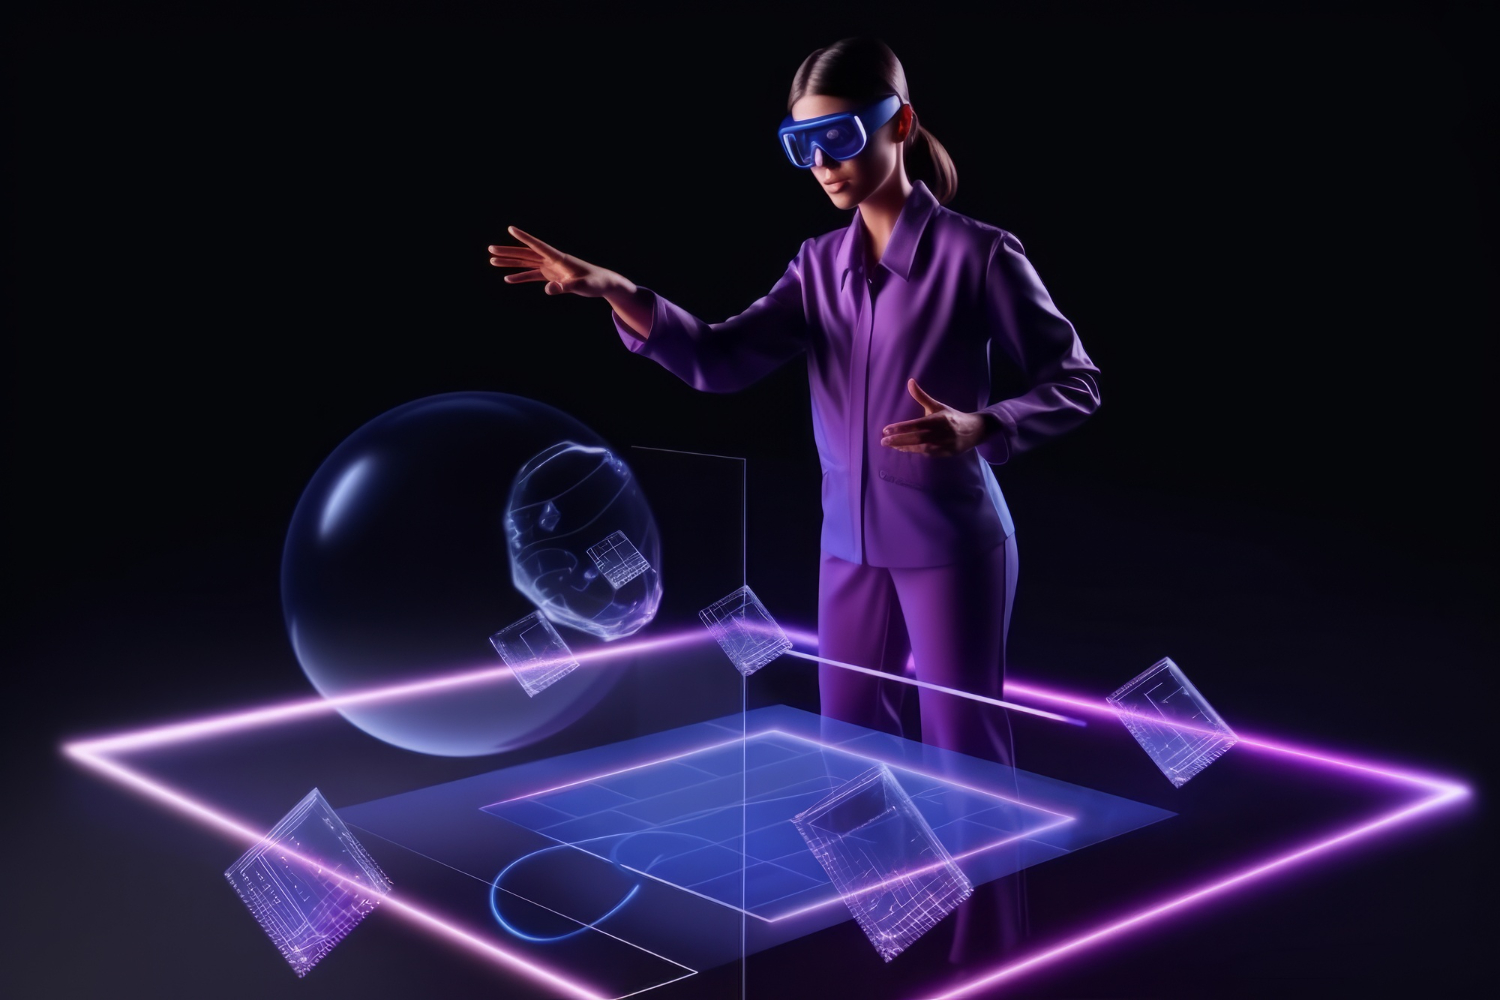 Virtual and Augmented Reality: New Opportunities in Entertainment, Education, and Business